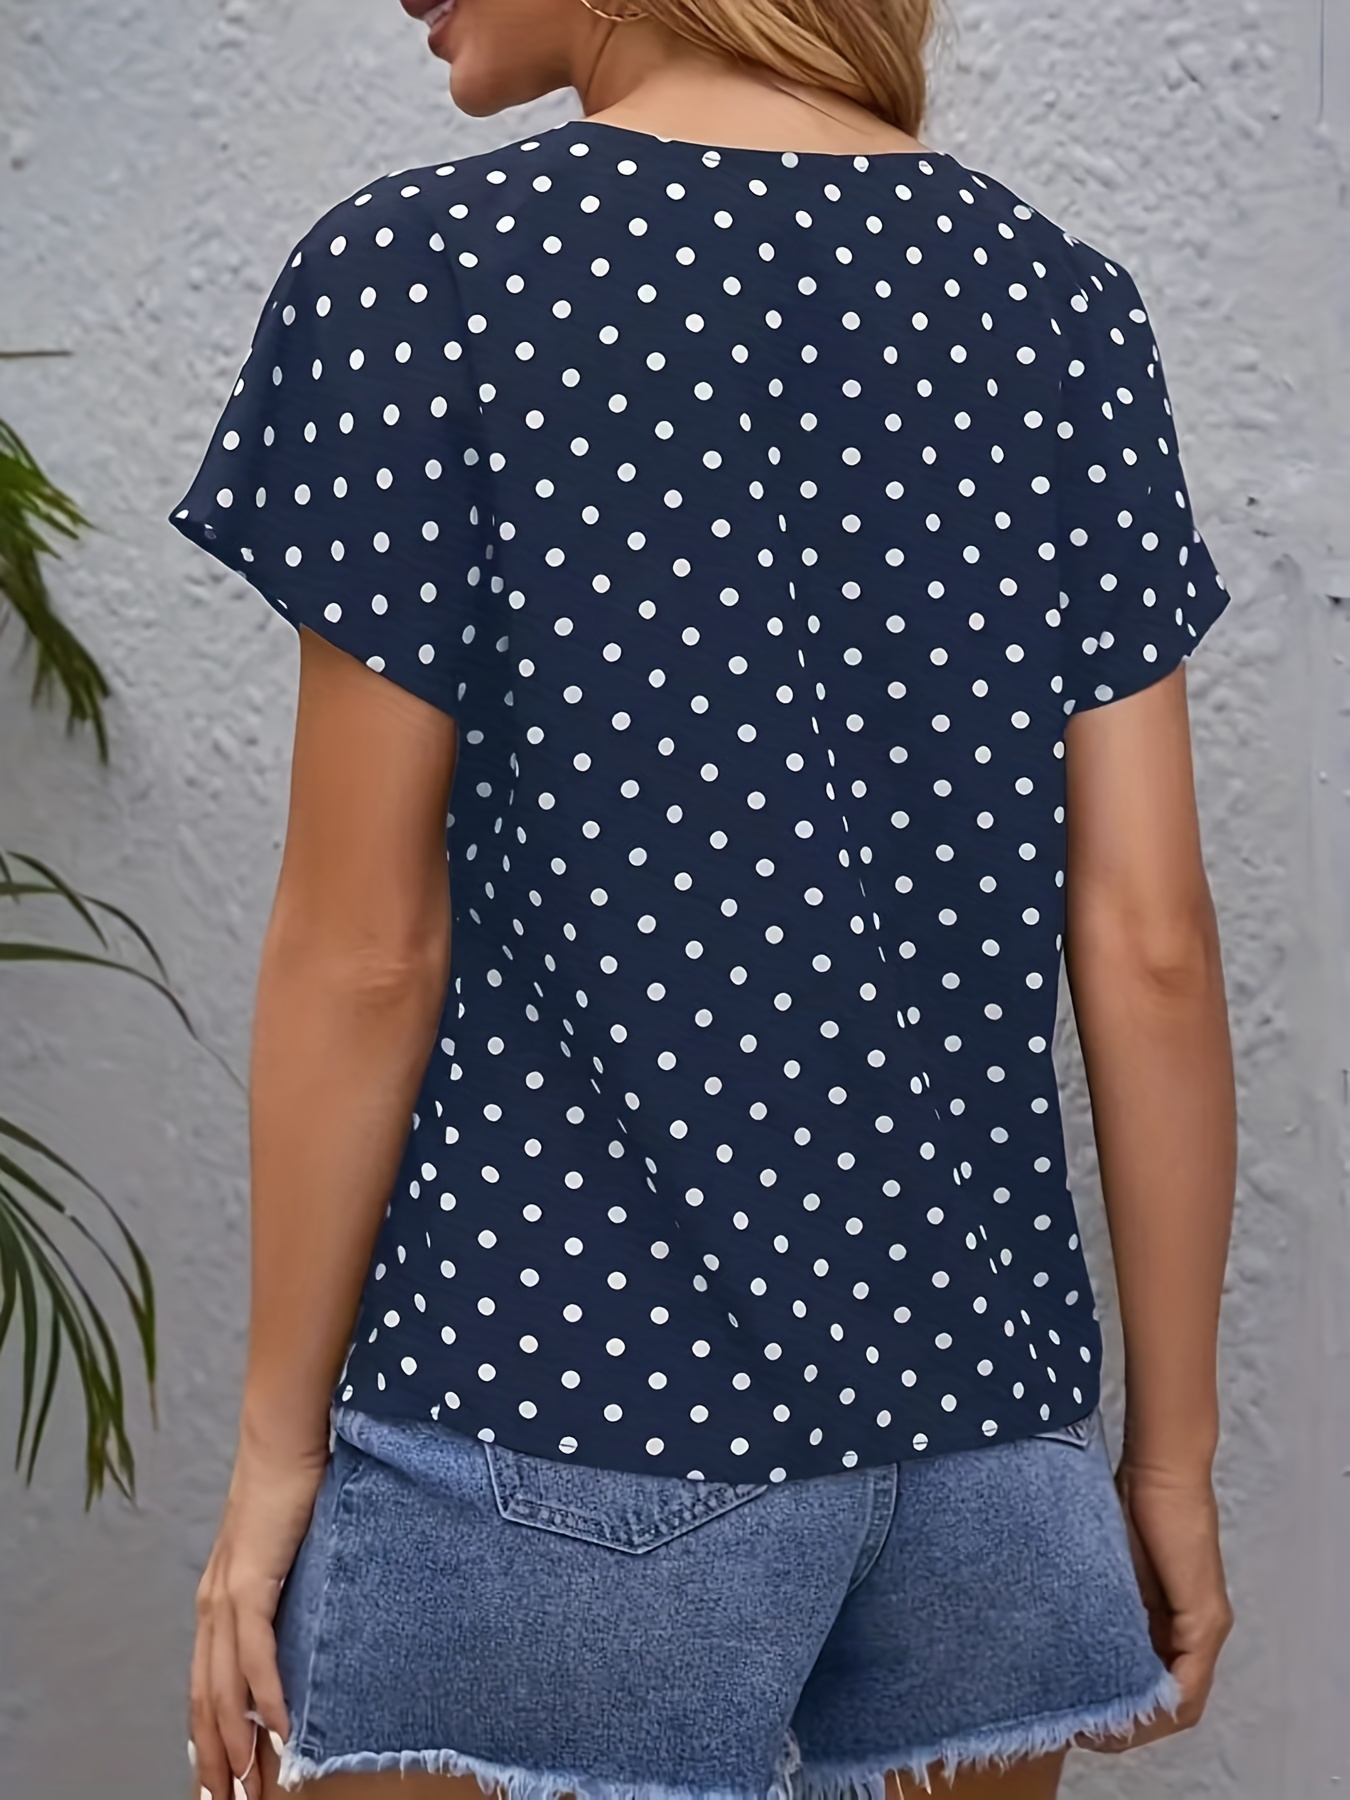 Women's Loose Casual Short Sleeve Top Navy Blue and White Polka